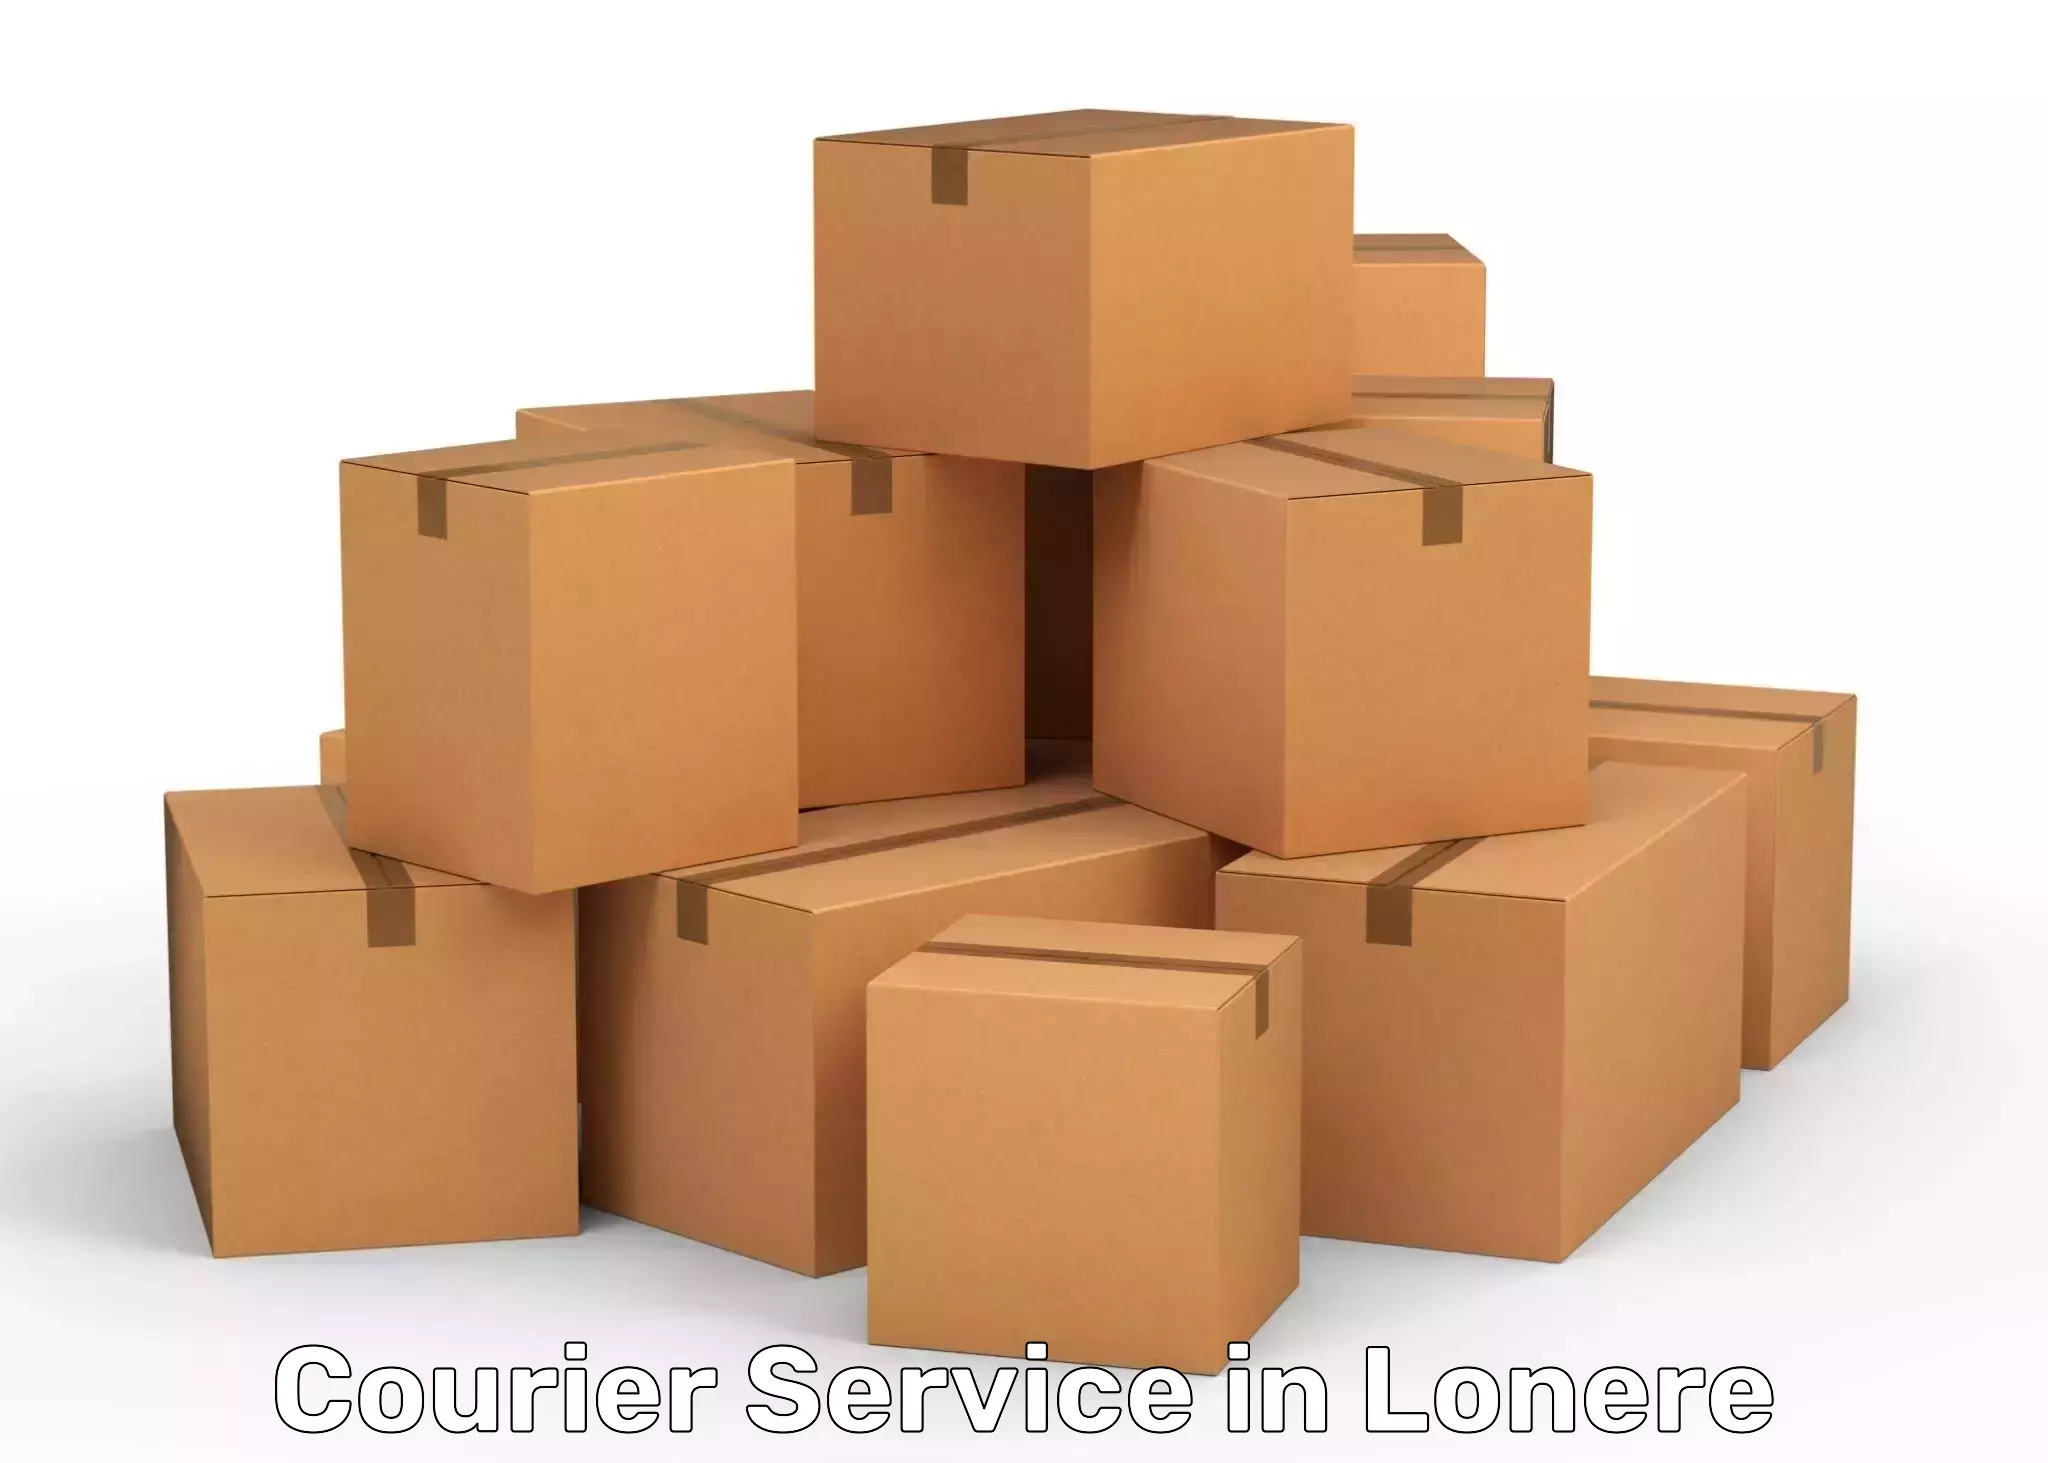 High-capacity shipping options in Lonere